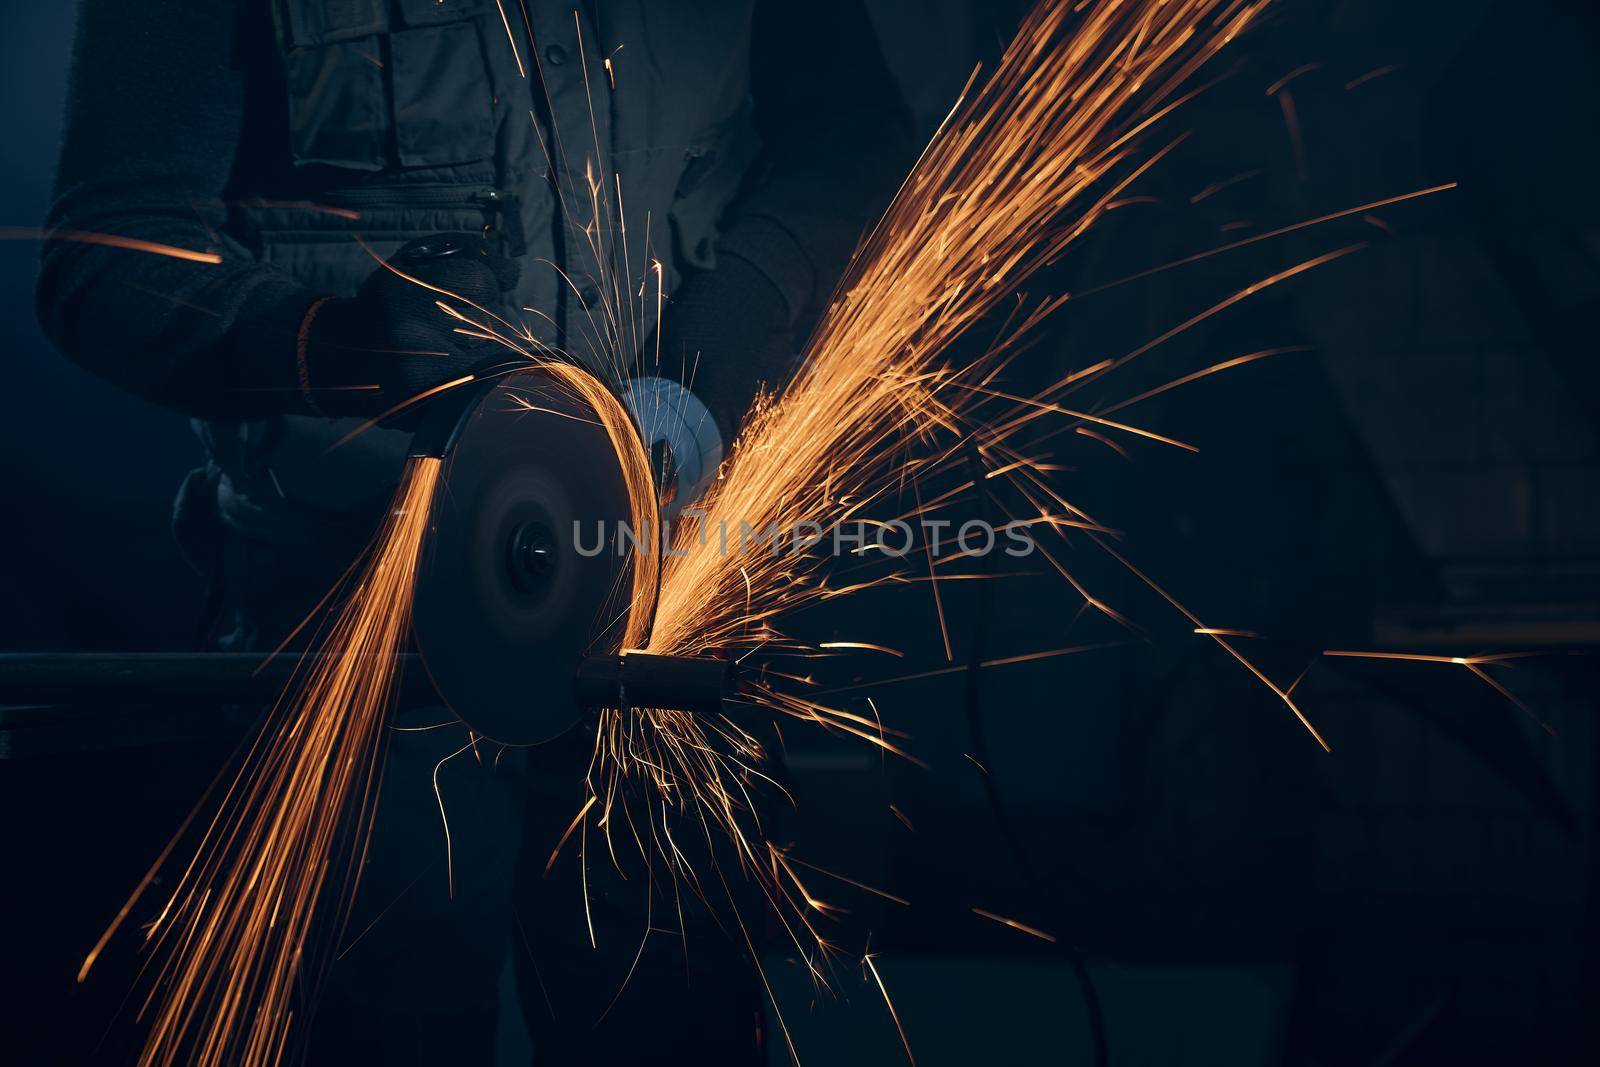 Close up of worker in special black suit working with angle grinder and grinding metal with large yellow sparks. Concept of polishing metal with special equipment in dark room.